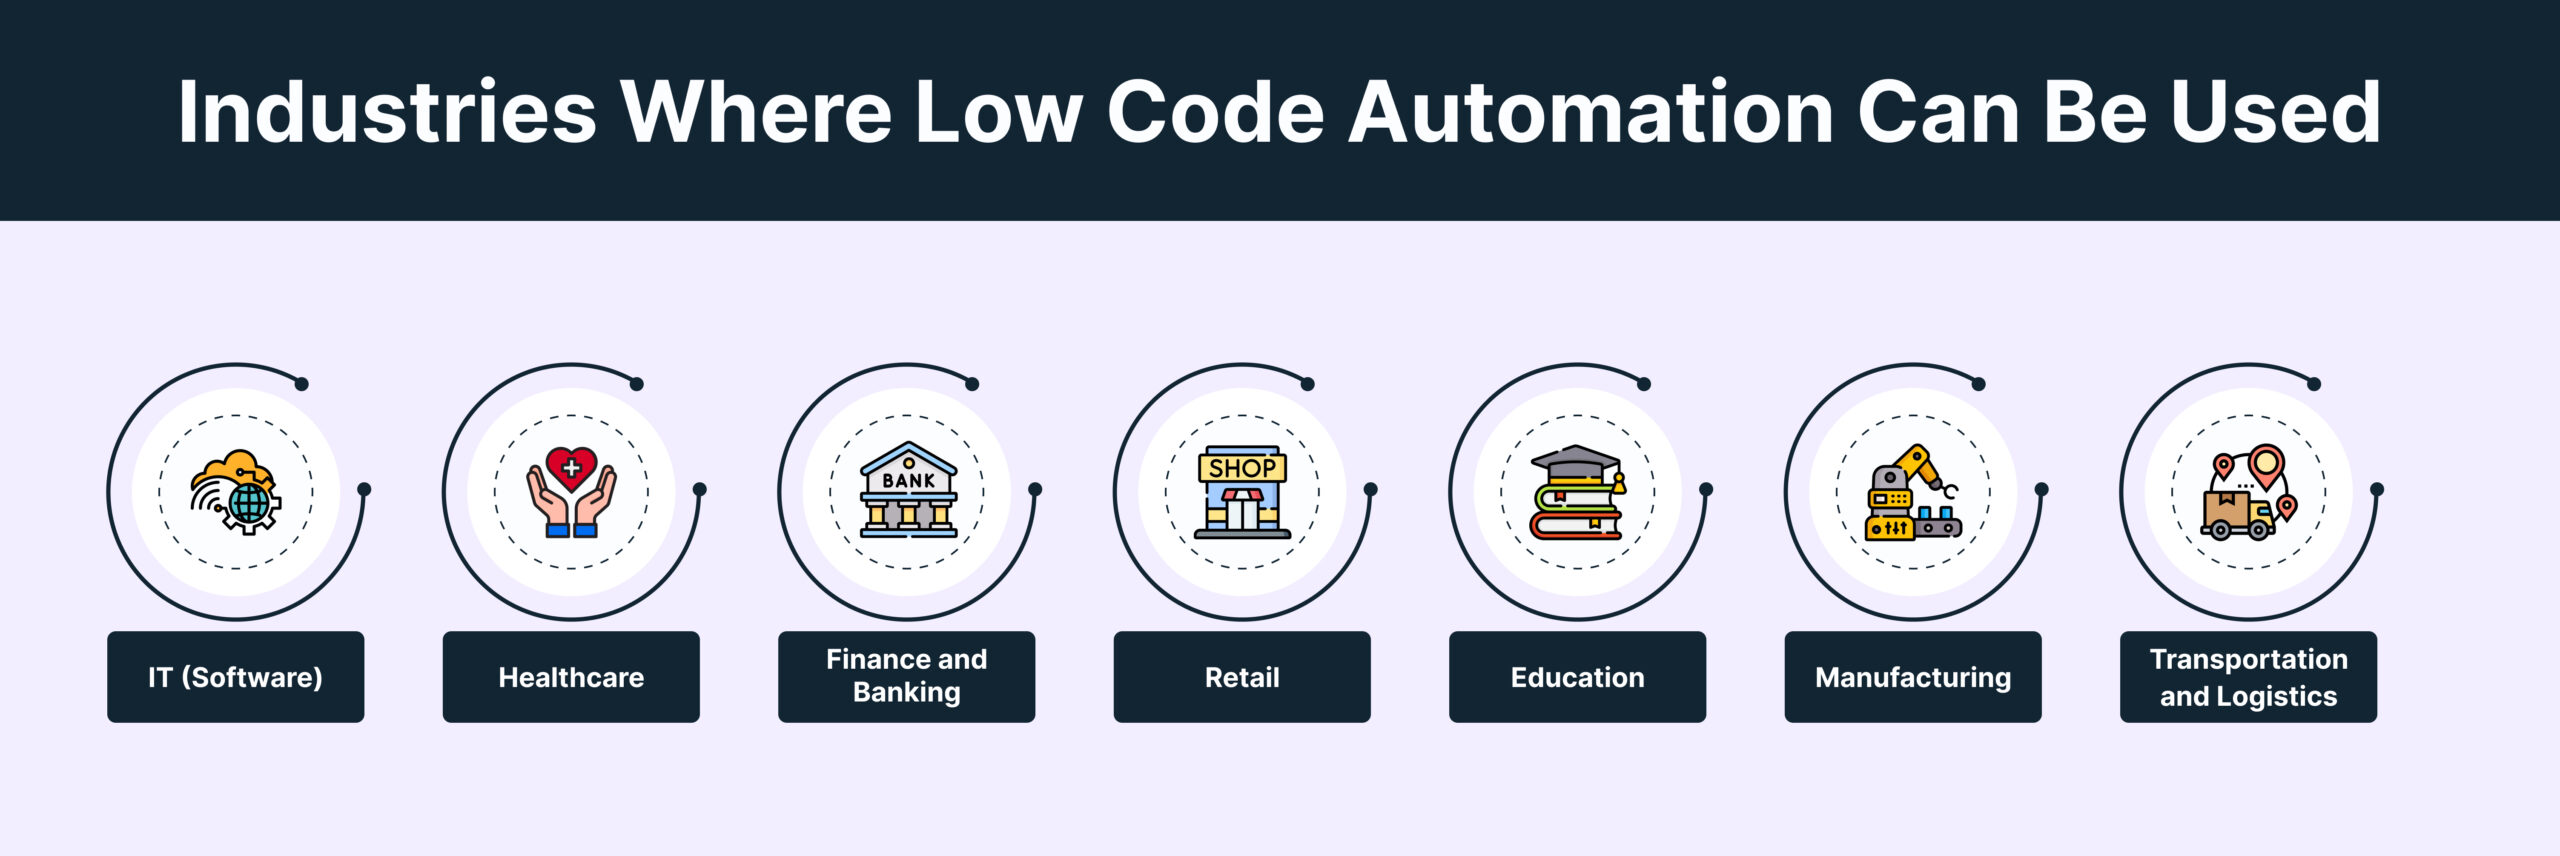 Industries Where Low Code Automation Can Be Used